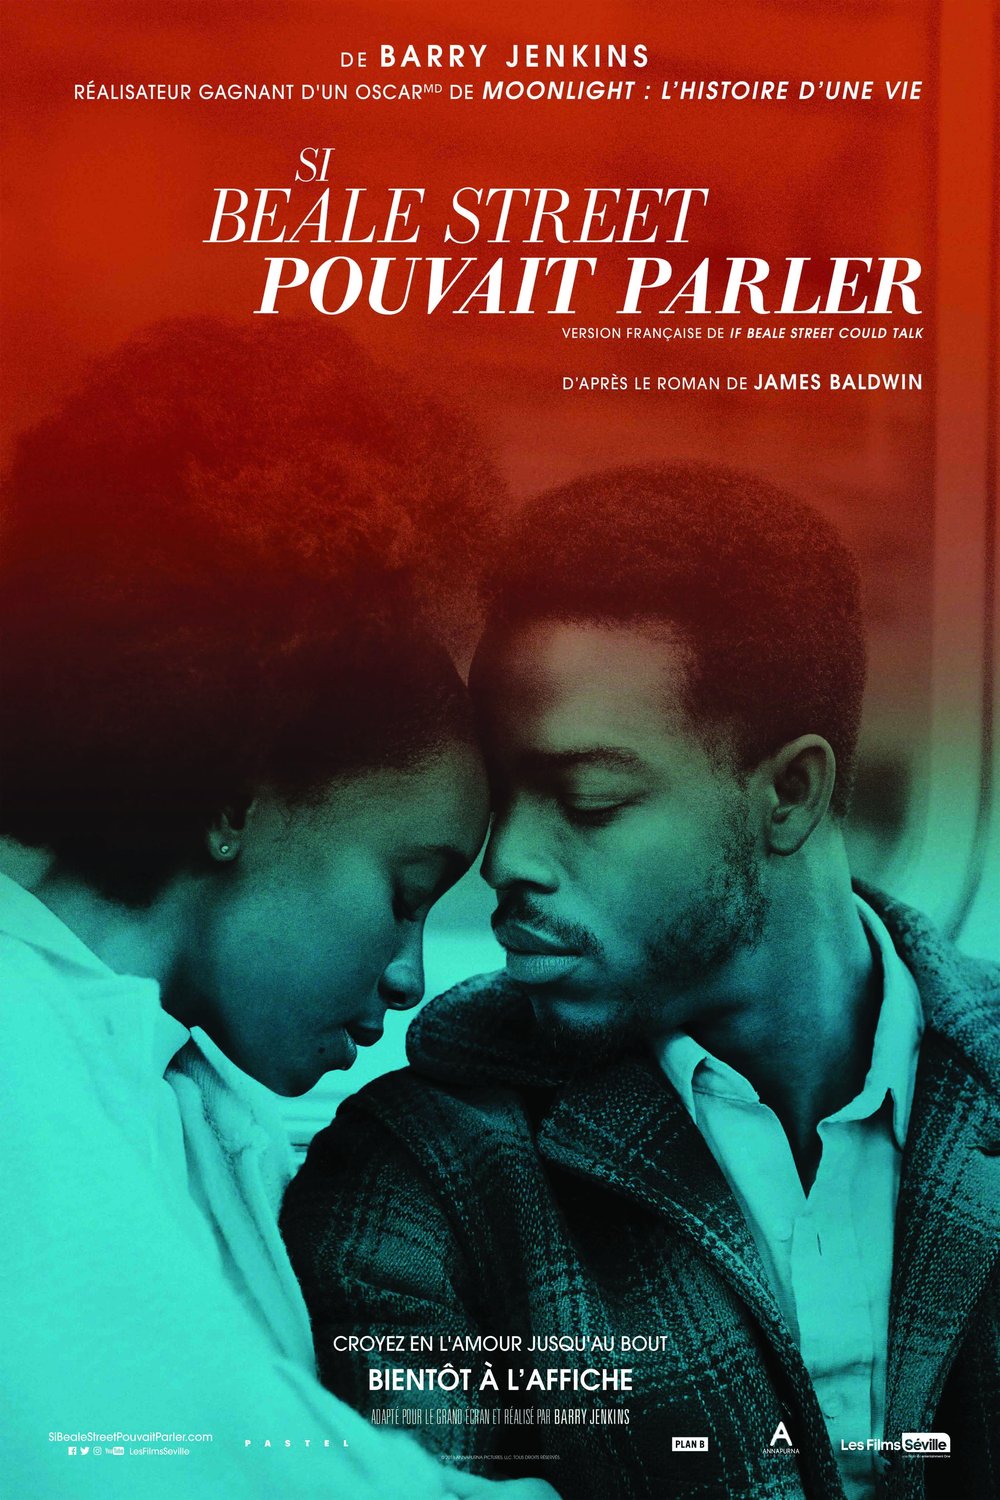 Poster of the movie Si Beale Street pouvait parler